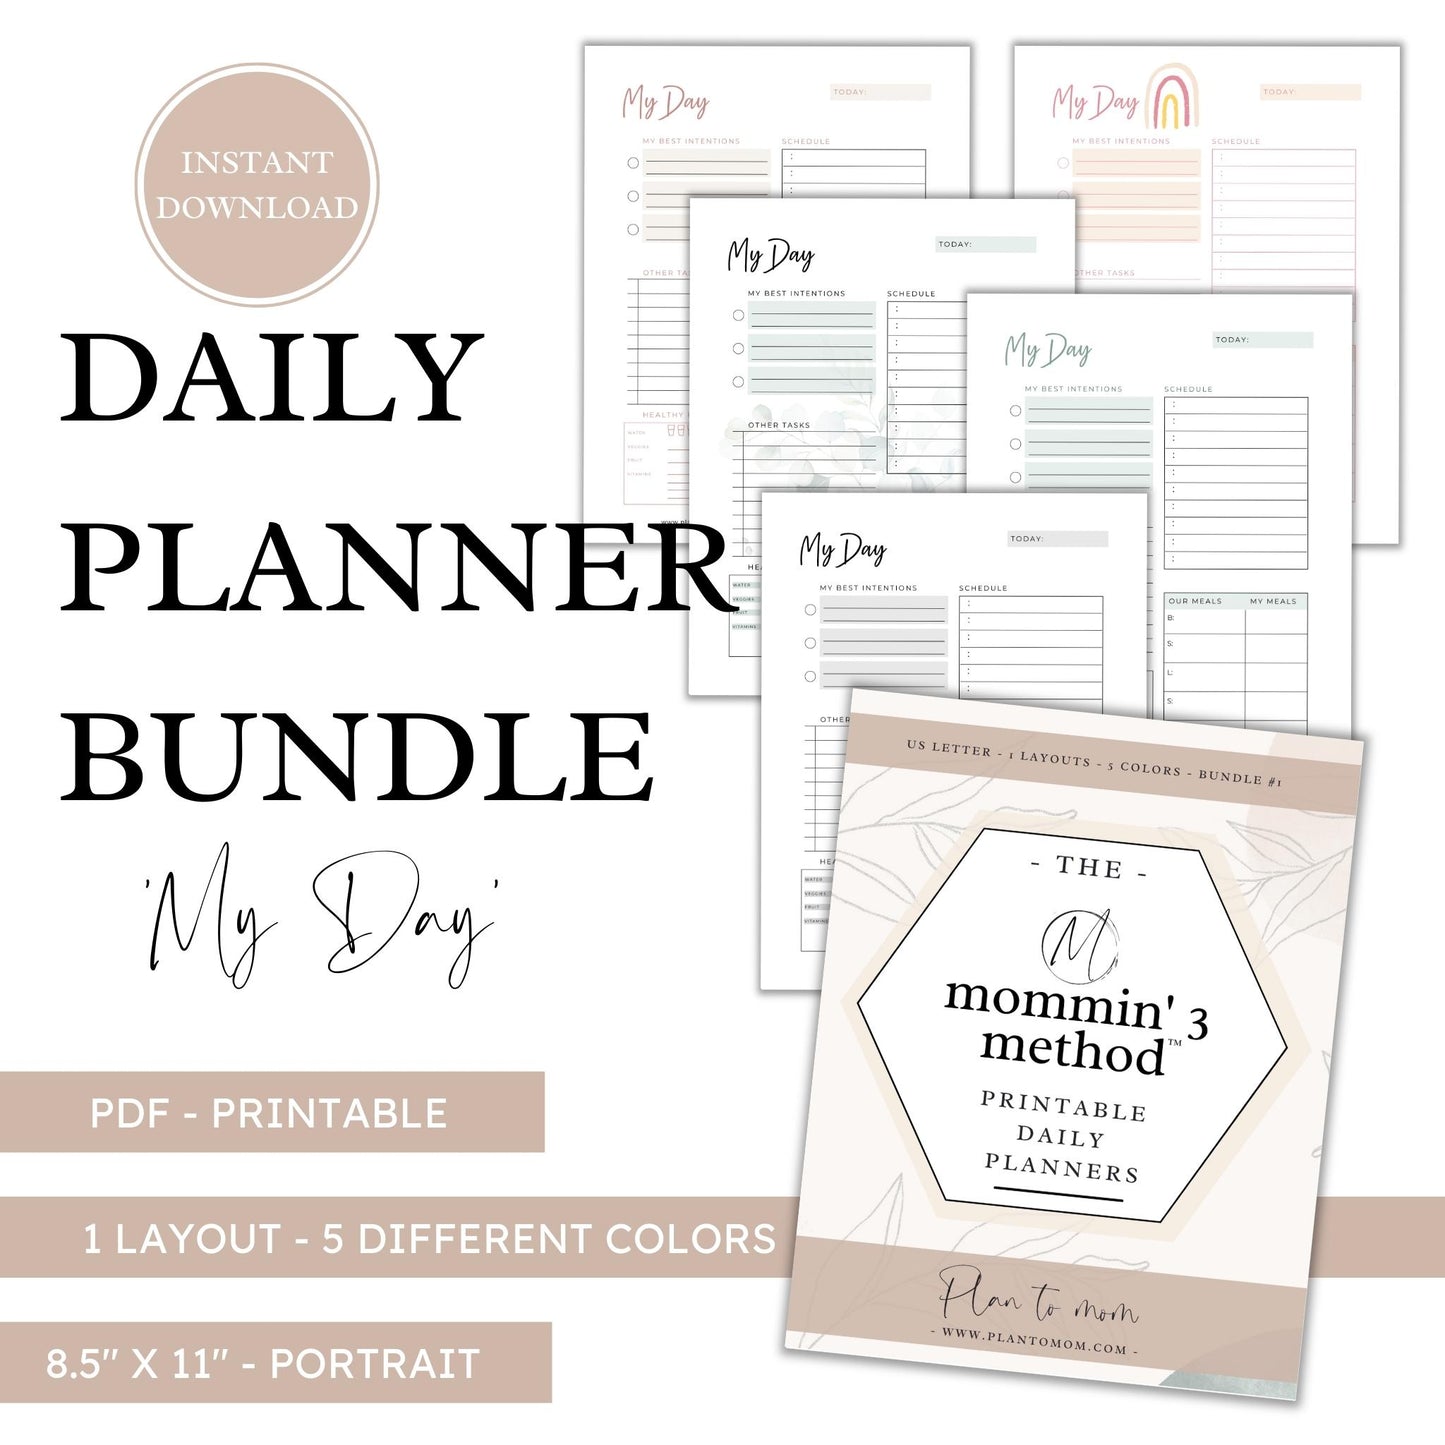 PRINTABLE DAILY PLANNER BUNDLE OF 5 - US LETTER COLOR 'MY DAY' LAYOUT